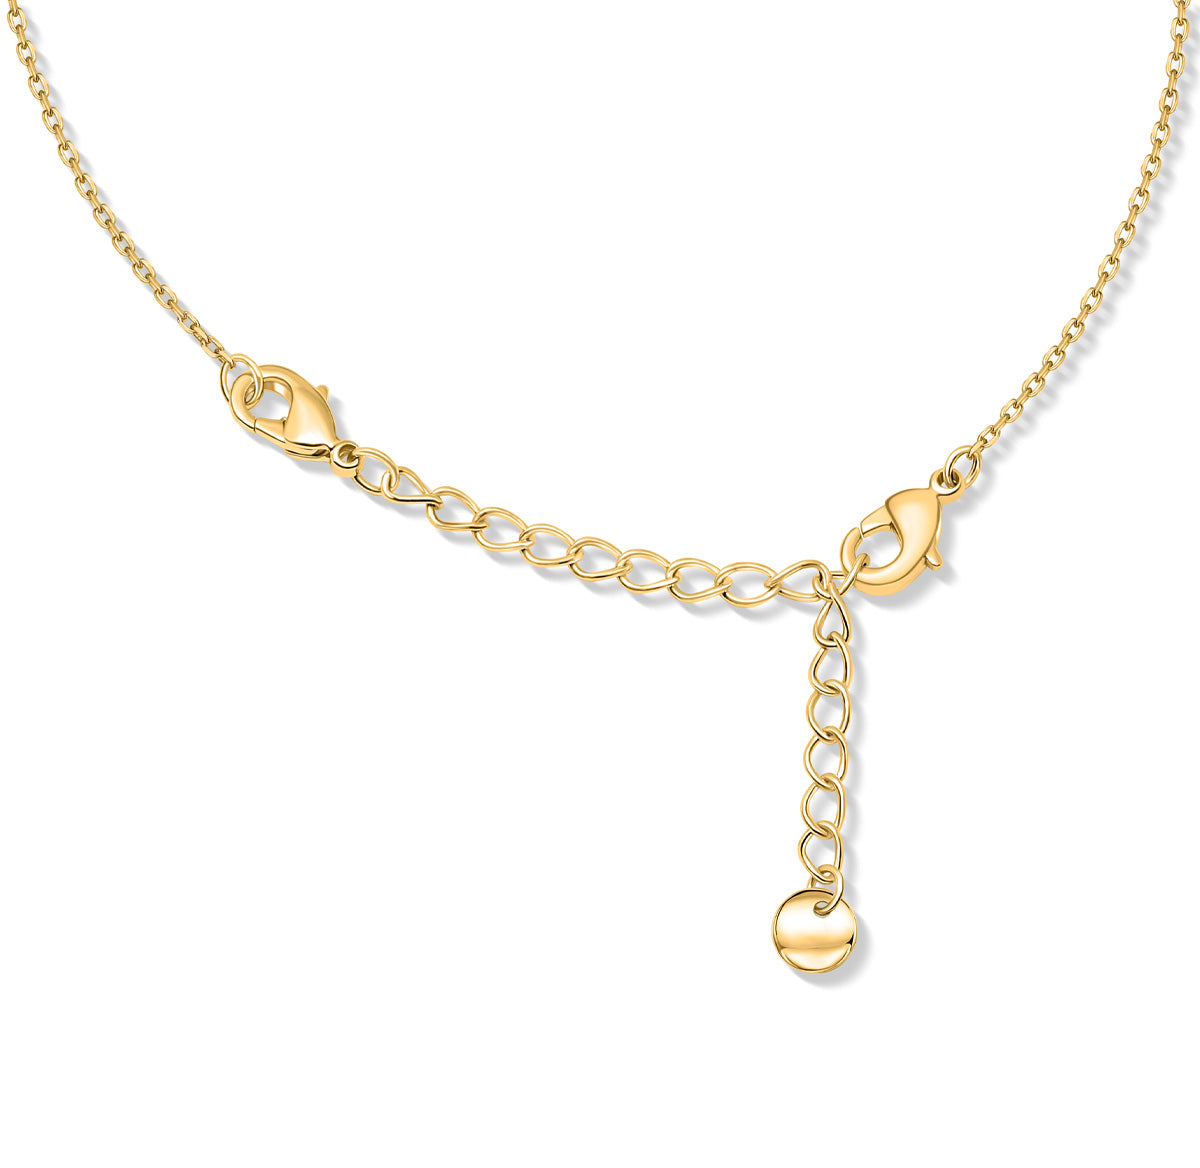 Gold plated chain extender for necklace